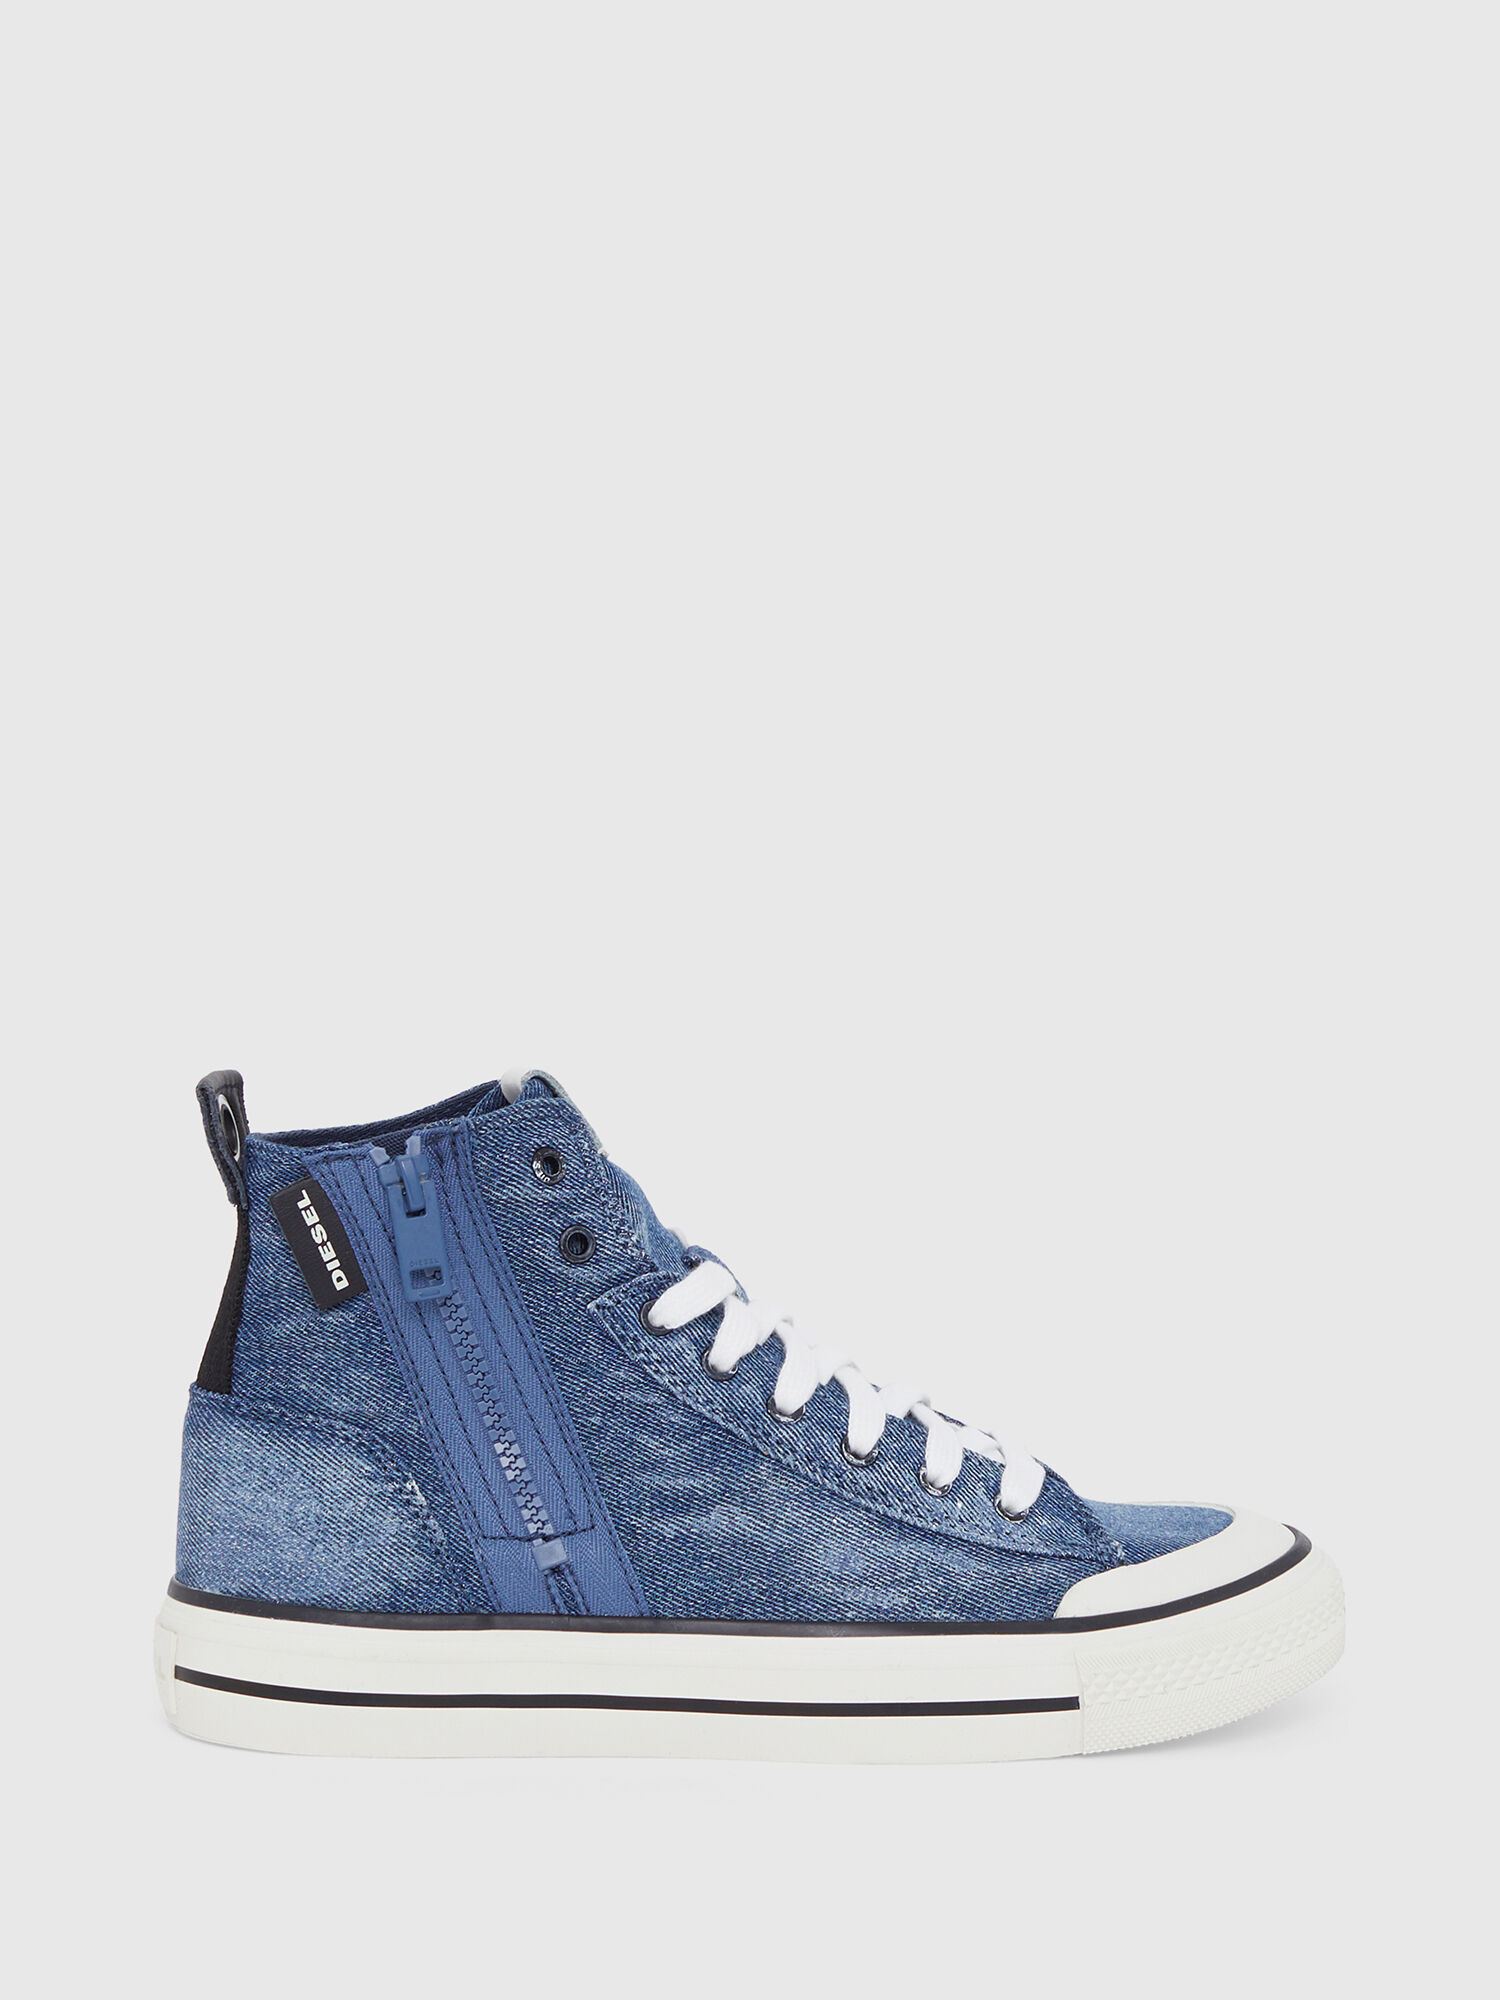 S-ASTICO MID ZIP W Woman: High-top 